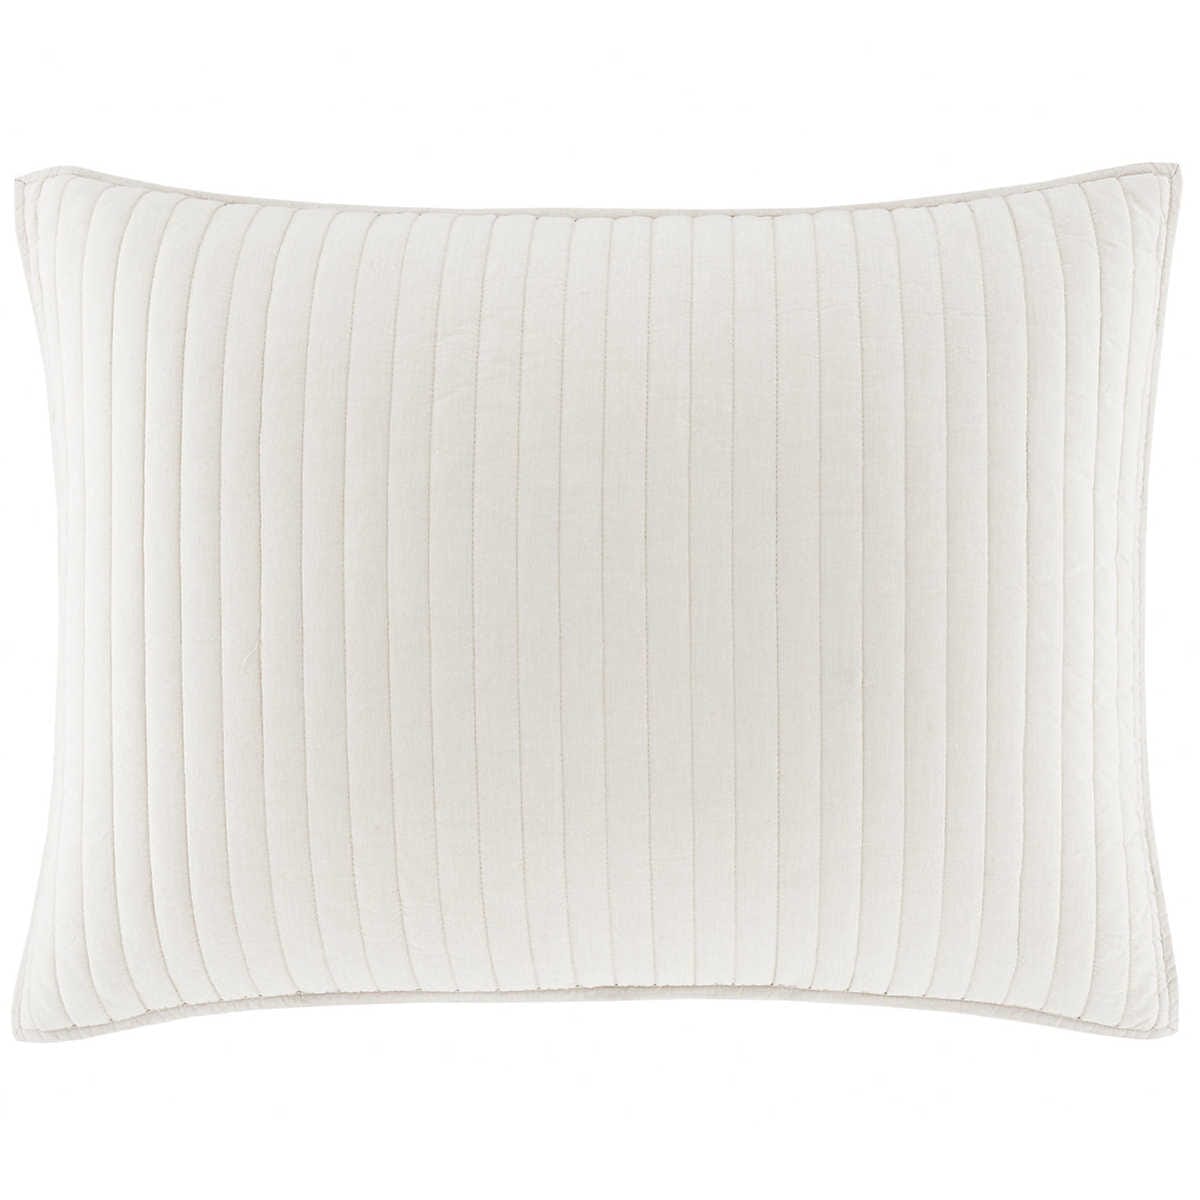 Cozy Cotton Natural Quilted Sham Pillowcases & Shams 